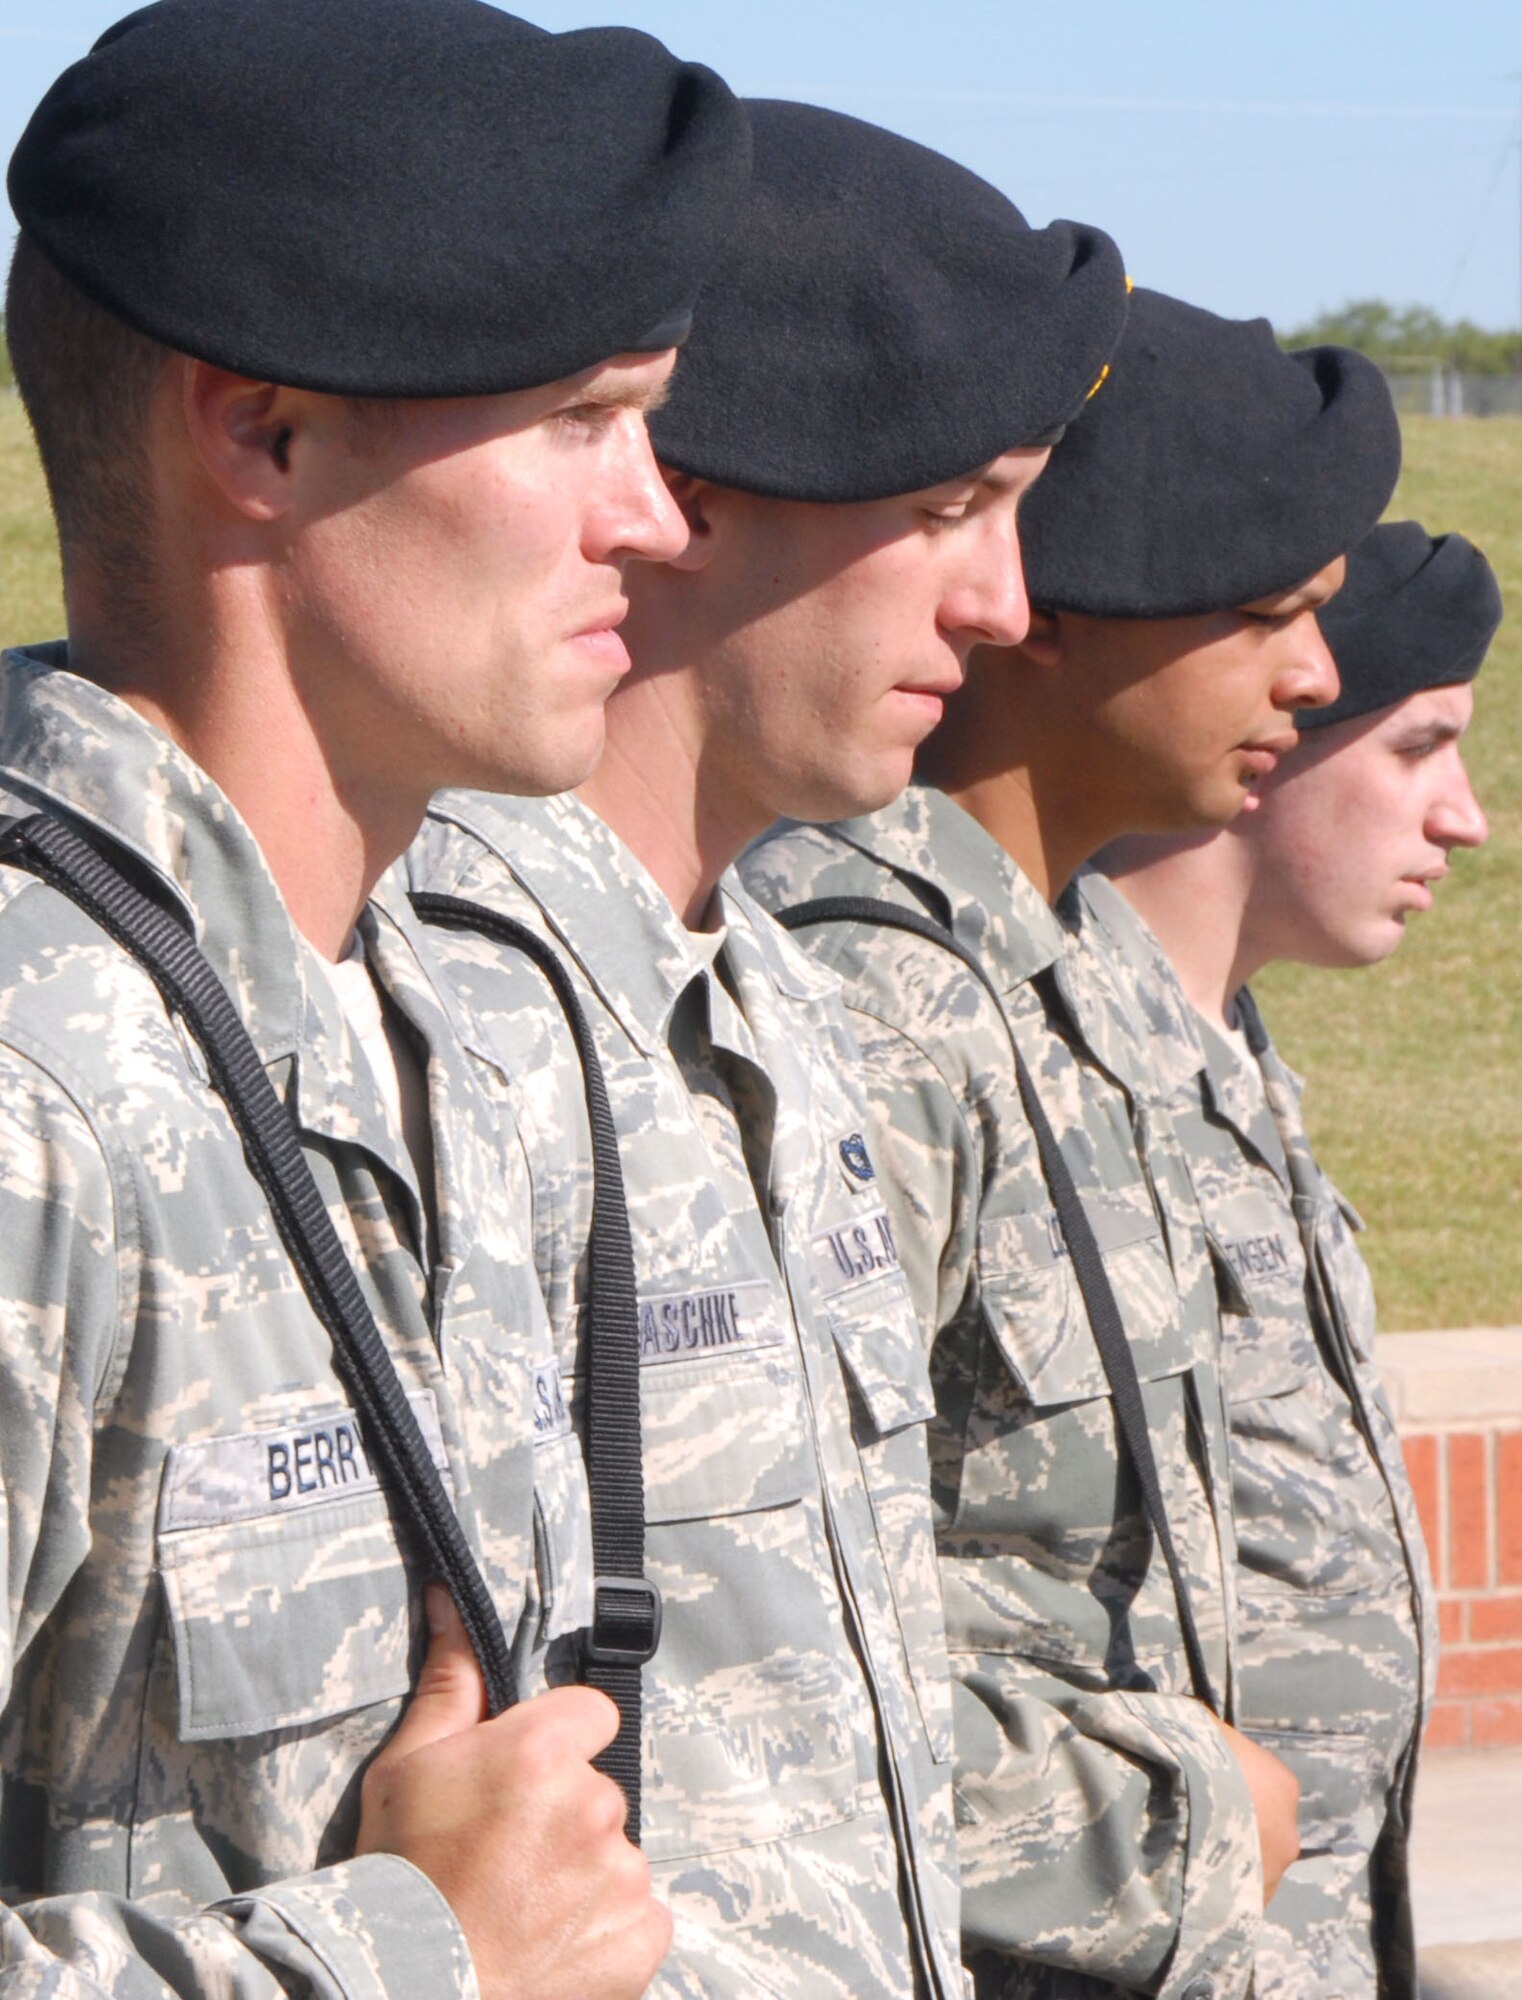 GOODFELLOW AIR FORCE BASE, Texas -- 17th Security Forces Squadron members wait in somber silence for Retreat to sound here Sept 28 during a ceremony commemorating the 5th anniversary of Airman 1st Class Elizabeth N. Jacobson's death. Airman Jacobson was the first Security Forces member and the first Air Force female to be killed in action in Iraq. (U.S. Air Force photo/Airman 1st Class Jessica D. Keith)